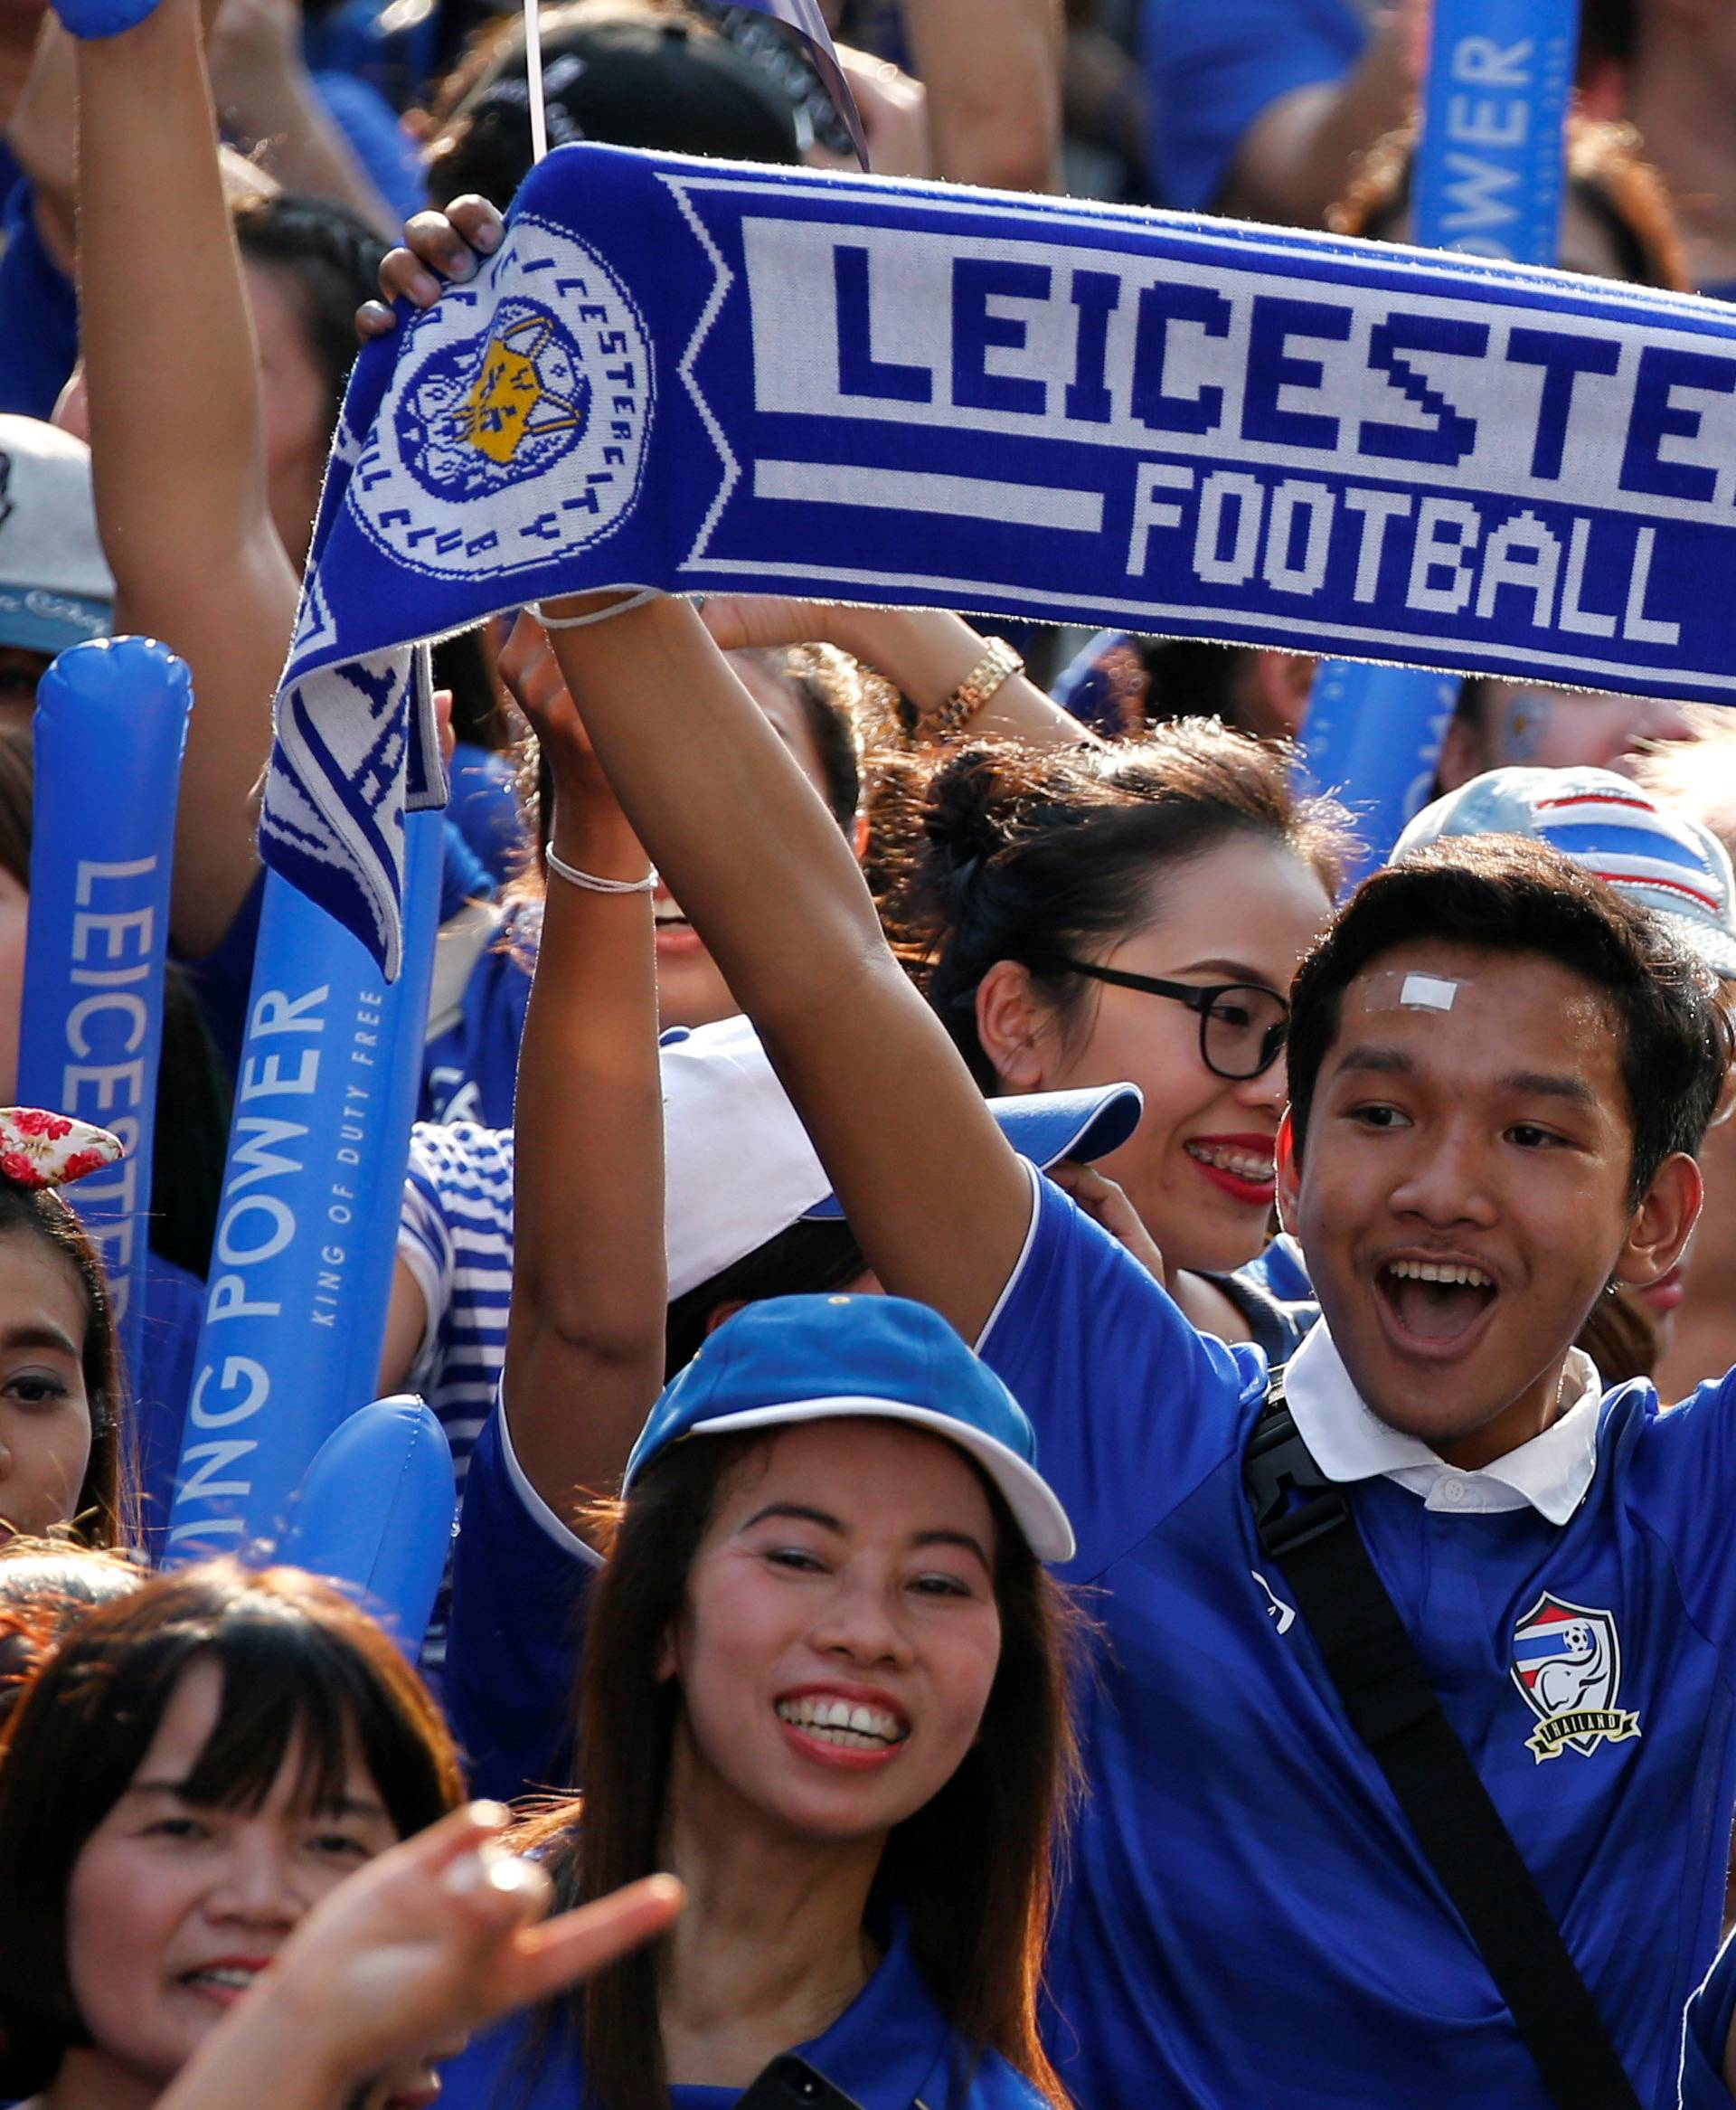 Leicester City soccer club's fans are seen during a parade to celebrate club's English Premier League title in Bangkok